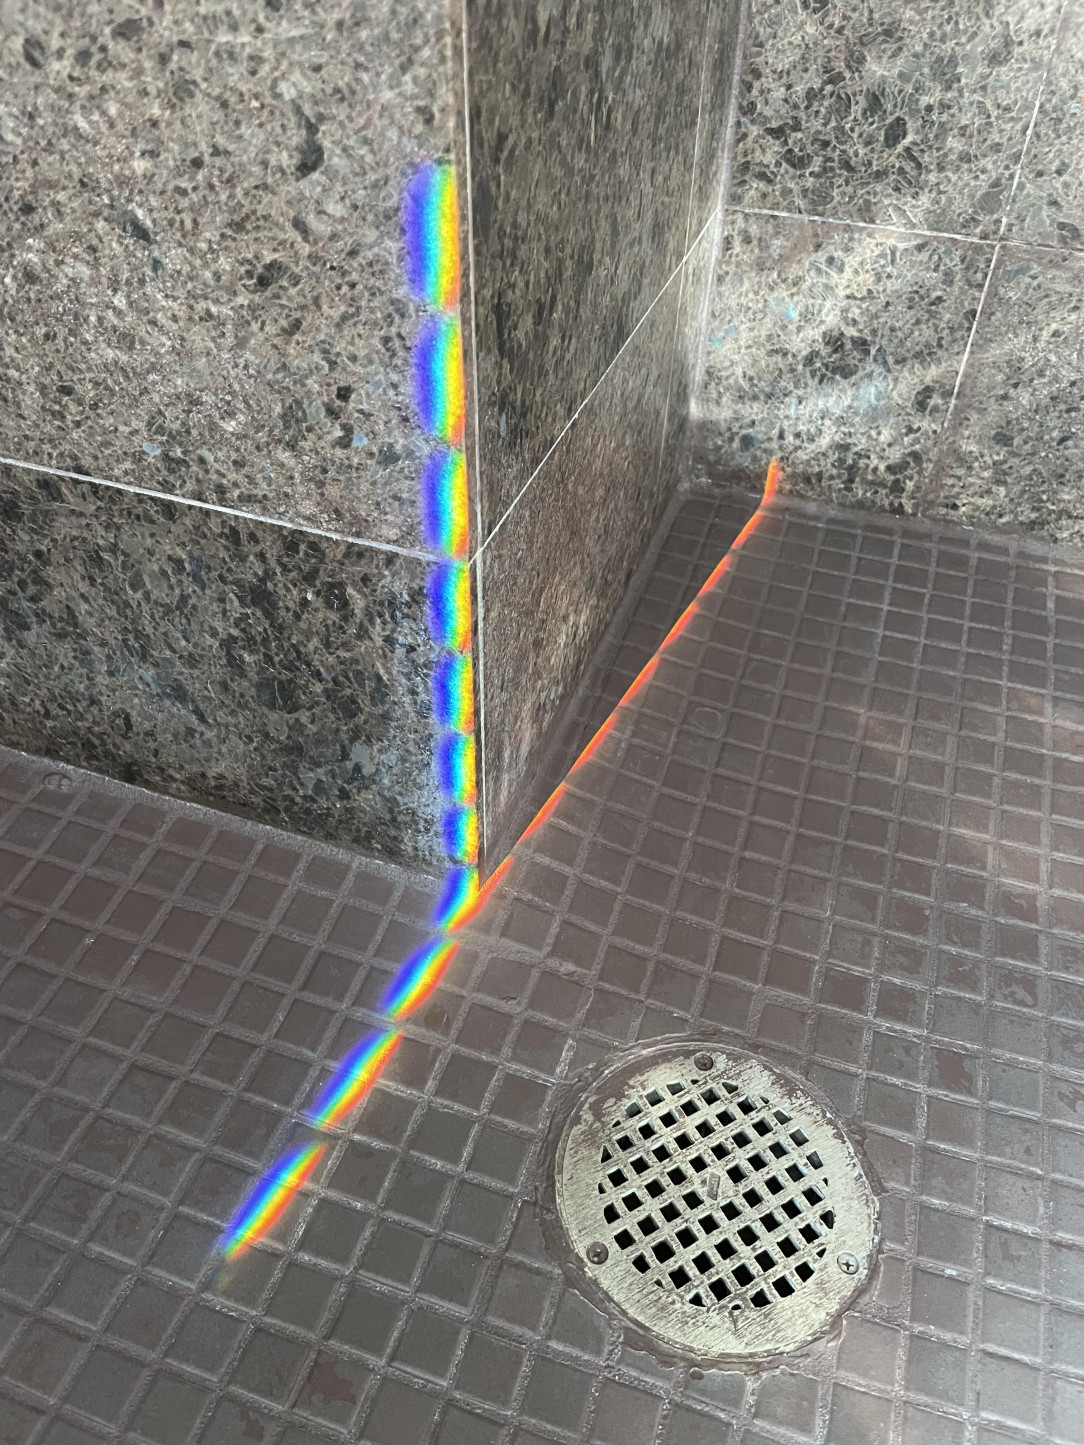 The way the spectrum is separated when the sunlight shines into this random hotel room shower